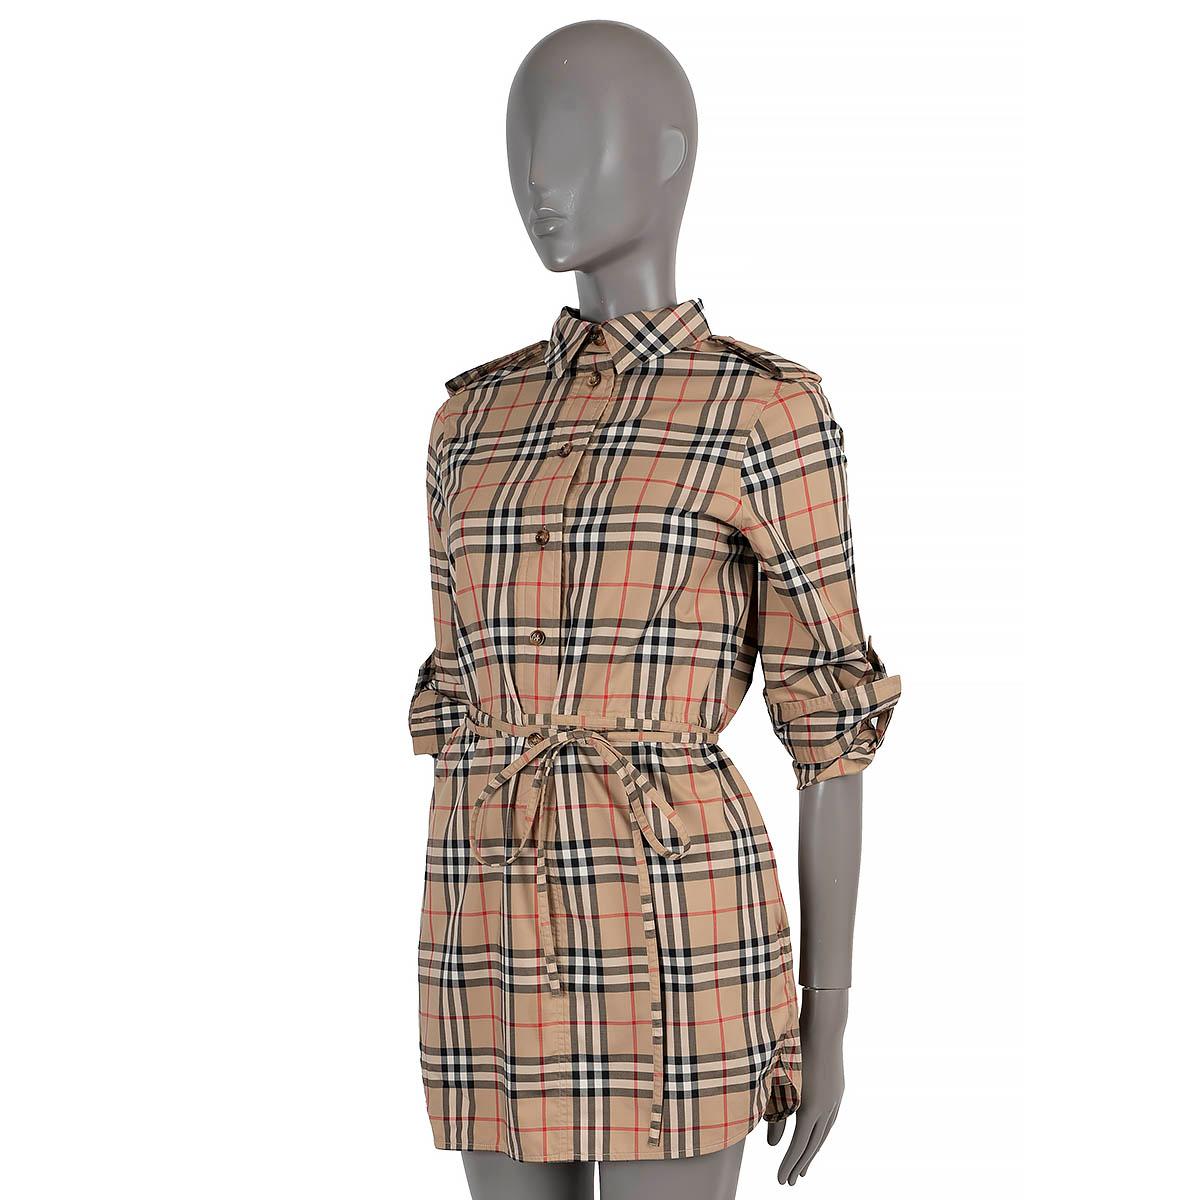 100% authentic Burberry Agnes shirt dress in Archive Beige (tan, red, black, white) poplin cotton (with 5% elastane). Features a relaxed silhouette with drawstring waist, curved hem, two side pockets, epaulettes, long sleeves that can be rolled-up